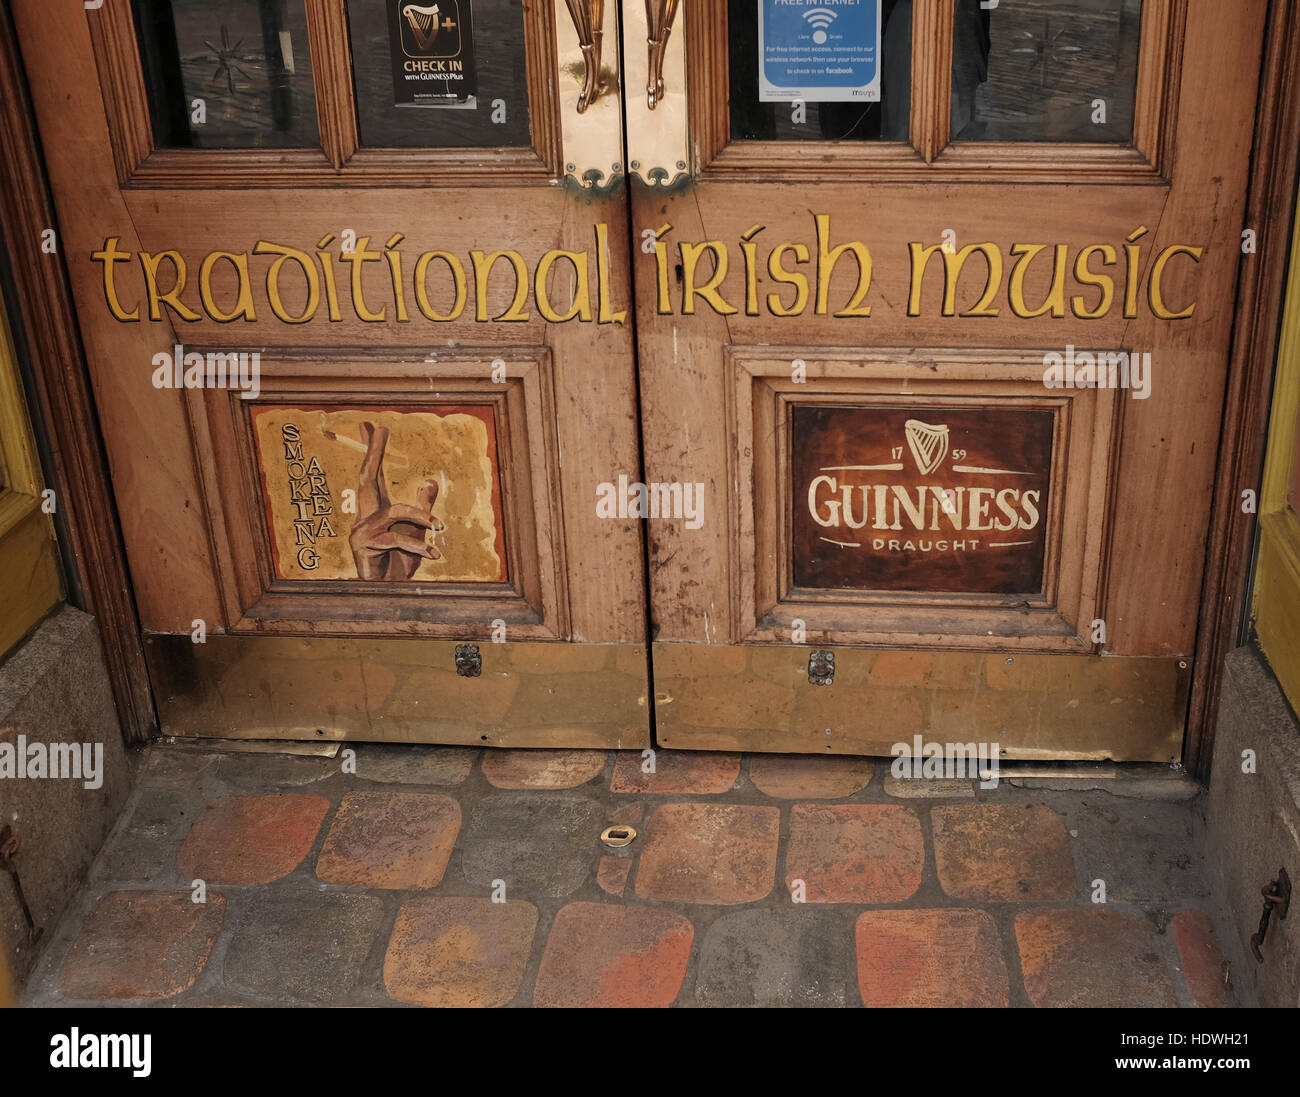 Entrance, doorway, and doors into a traditional Irish pub in the Temple Bar area of Dublin, Ireland. Stock Photo